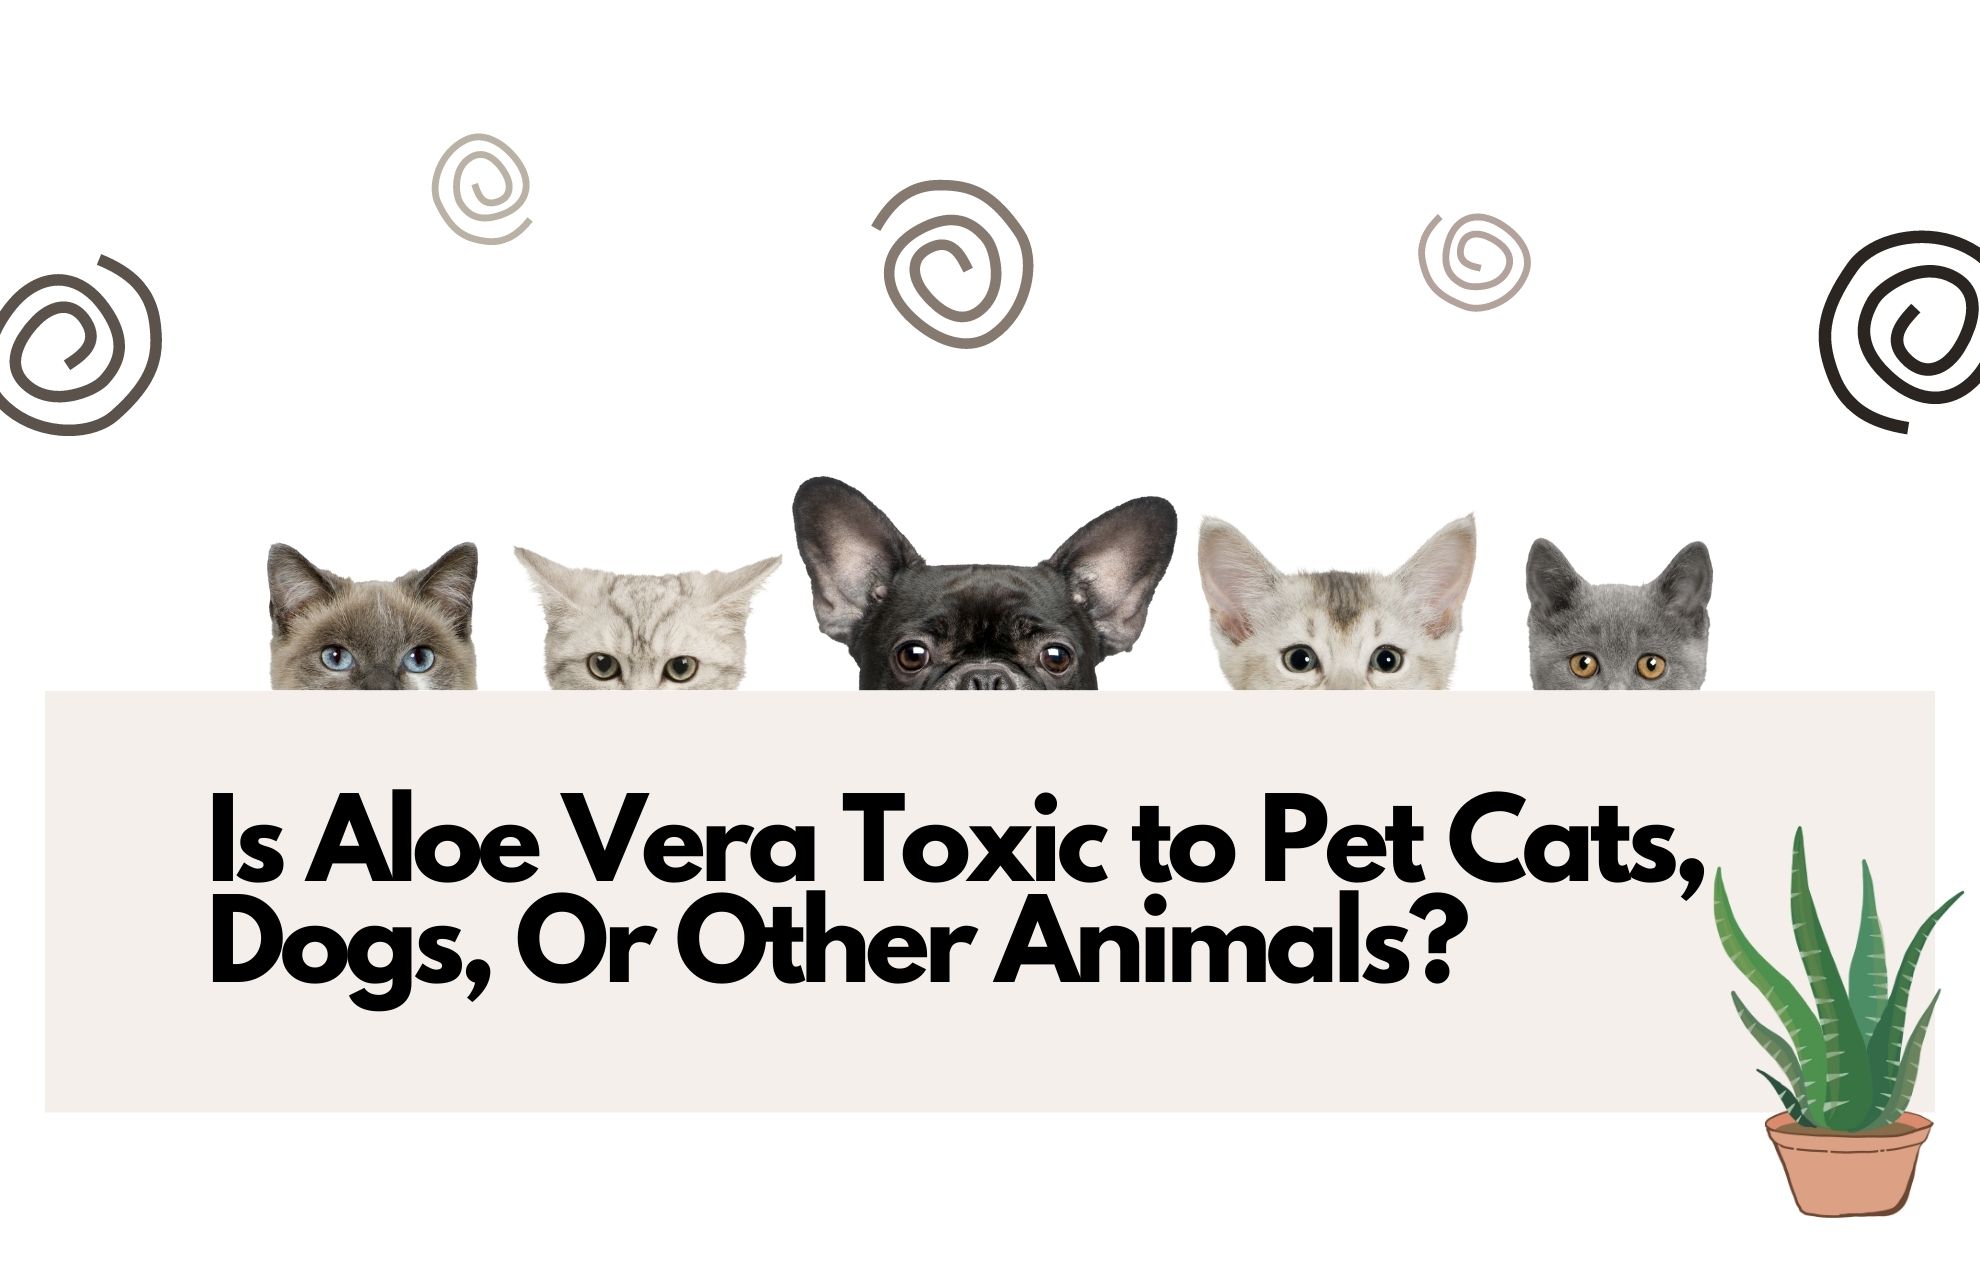 Is Aloe Vera Toxic to Pet Cats, Dogs, Or Other Animals